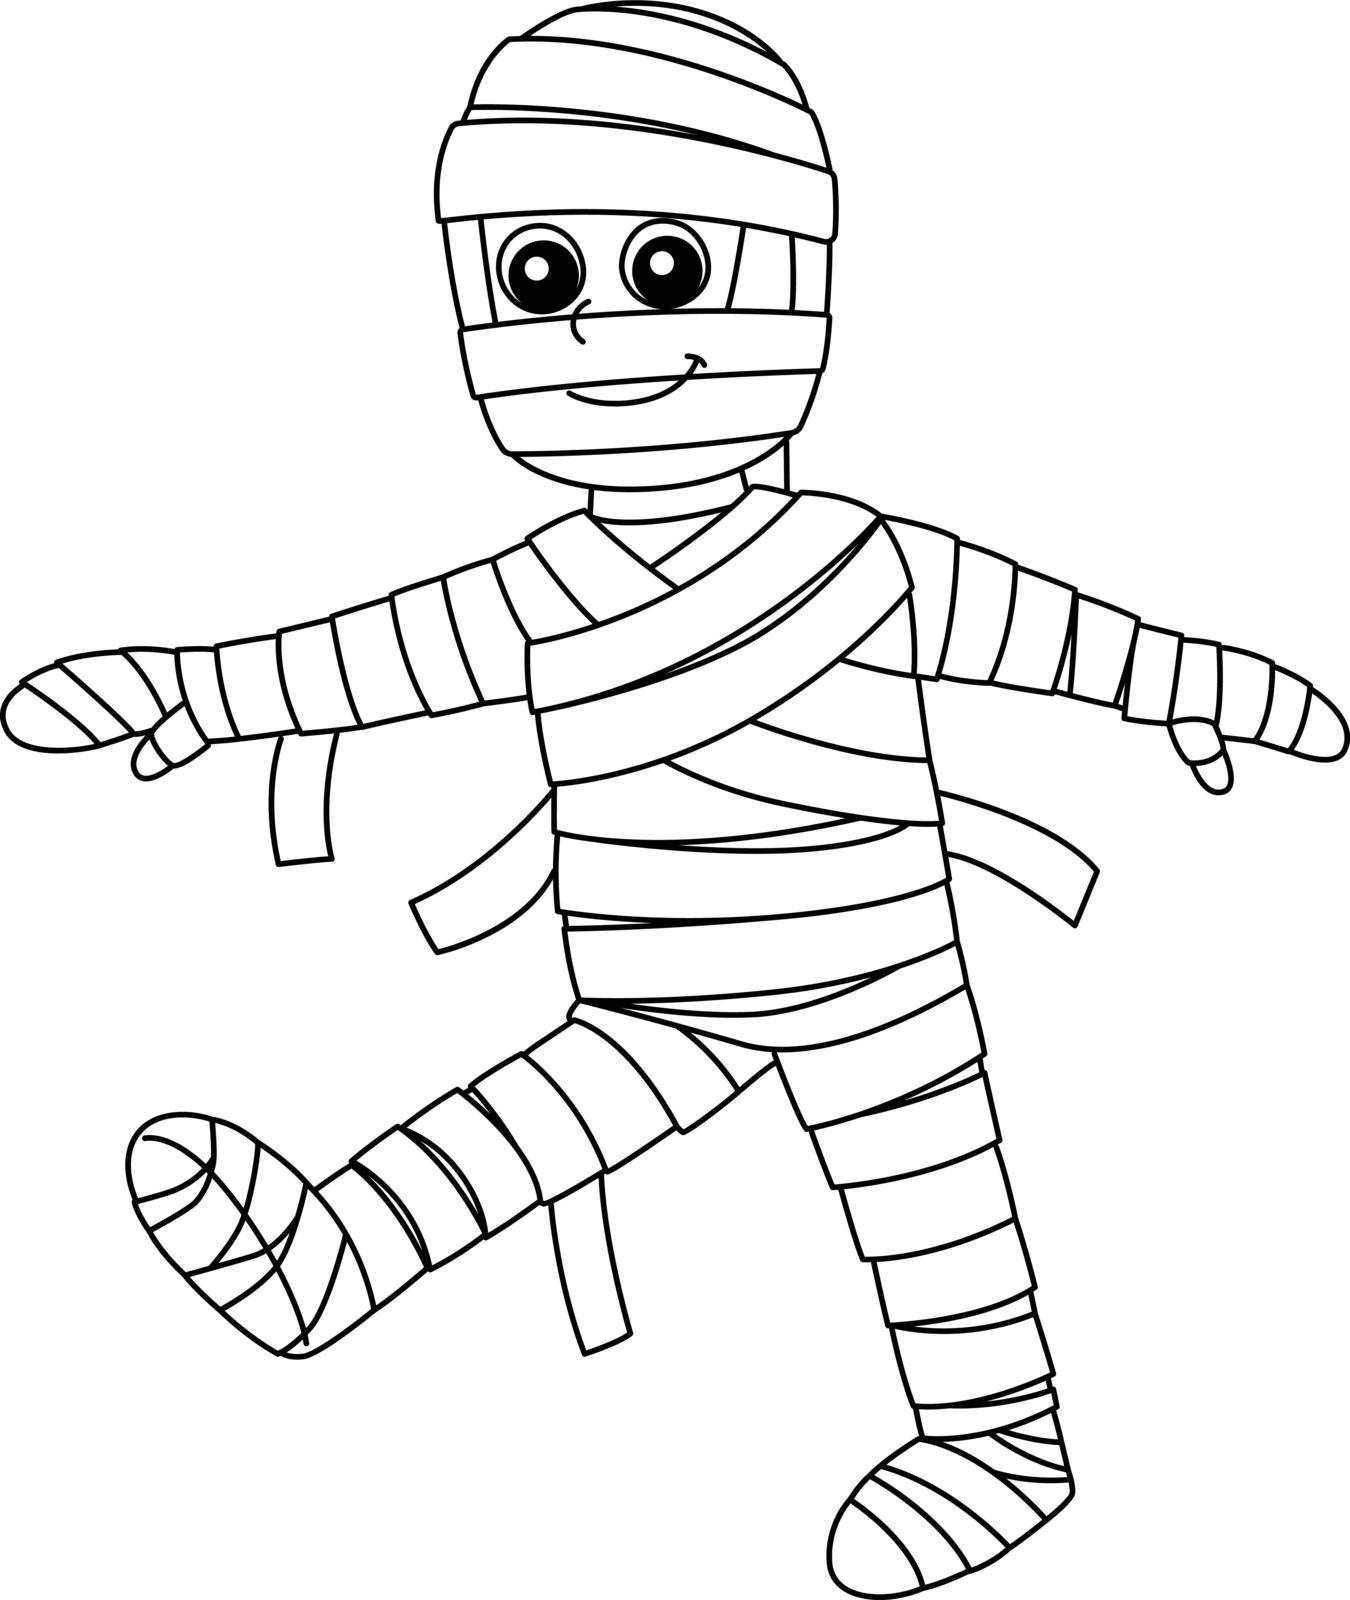 A cute and funny coloring page of a mummy Halloween. Provides hours of coloring fun for children. To color, this page is very easy. Suitable for little kids and toddlers.